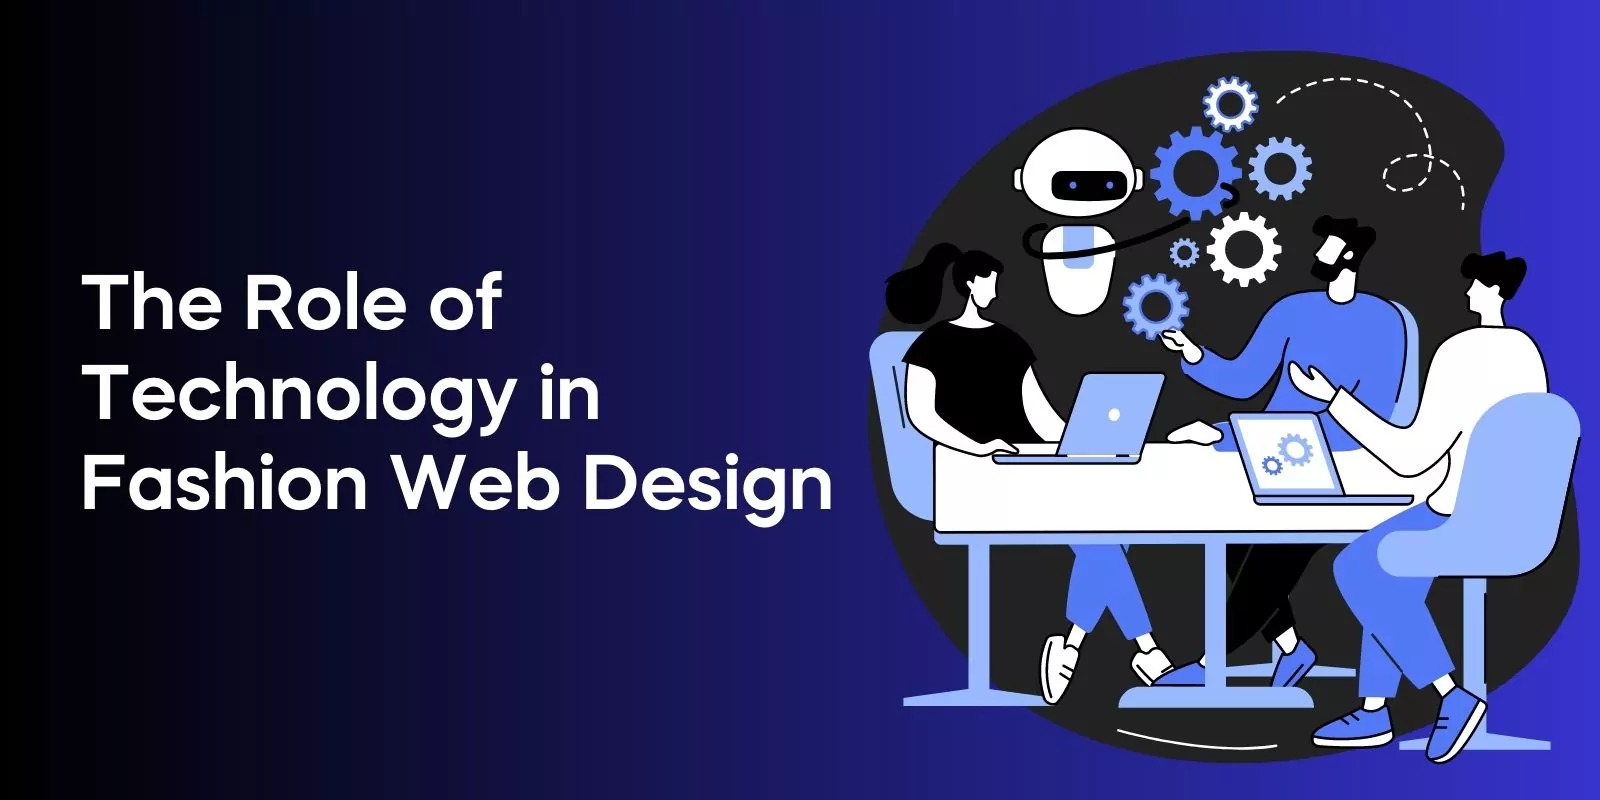 The Role of Technology in Fashion Web Design